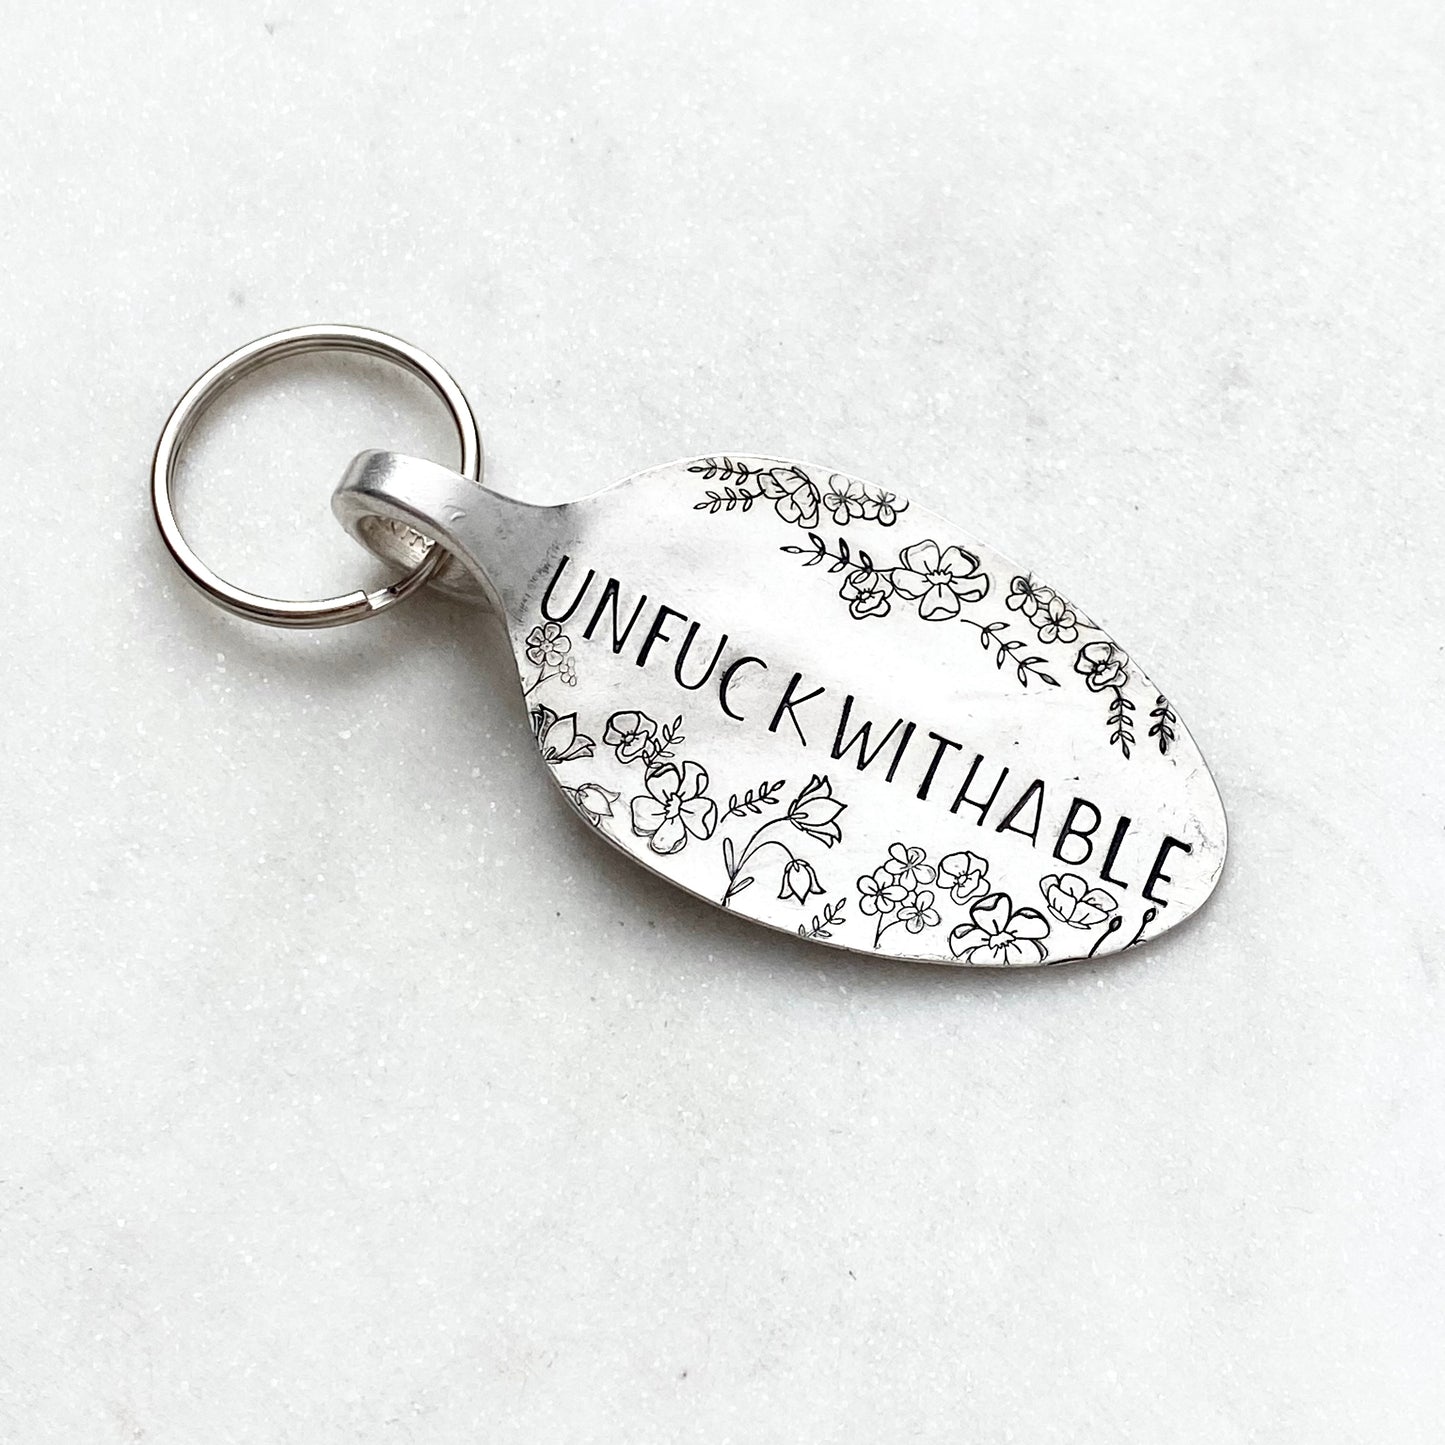 Unfuckwithable, Hand Stamped Vintage Spoon Keychain